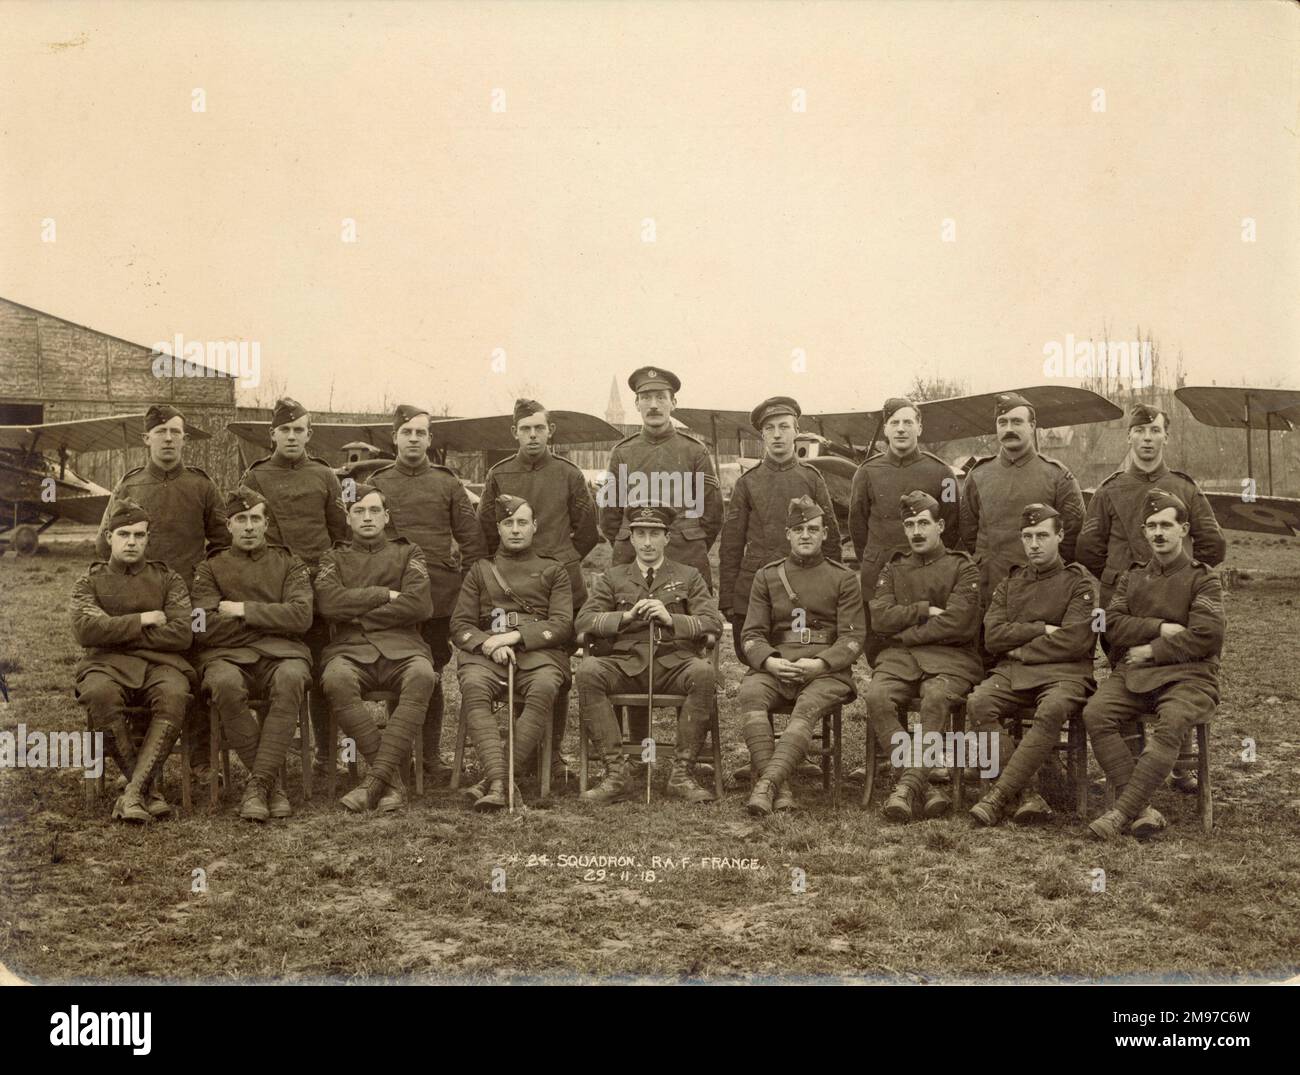 Warrant Officers, Flight Sergeants and Sergeants of No24 Squadron RAF in France, 29 November 1918. Back row: Sgts A. Dearman, V.E.T. Hoskins, L. Garland, L.C. Cox, A. Wilson, H. Brown, R.A.E. Percy, W. Green and J.W. Welch. Front row: Sgt C.H. Peters, Flt Sgts J.H. Langston and F.R.V. Tealby, Sgt Major L.C. King, Major V.A.H. Robson, MC, T Sgt Major F. Schofield, MSM, Flt Sgts F.T. Thould and H. Edwards and Sgt W.L. French. Stock Photo